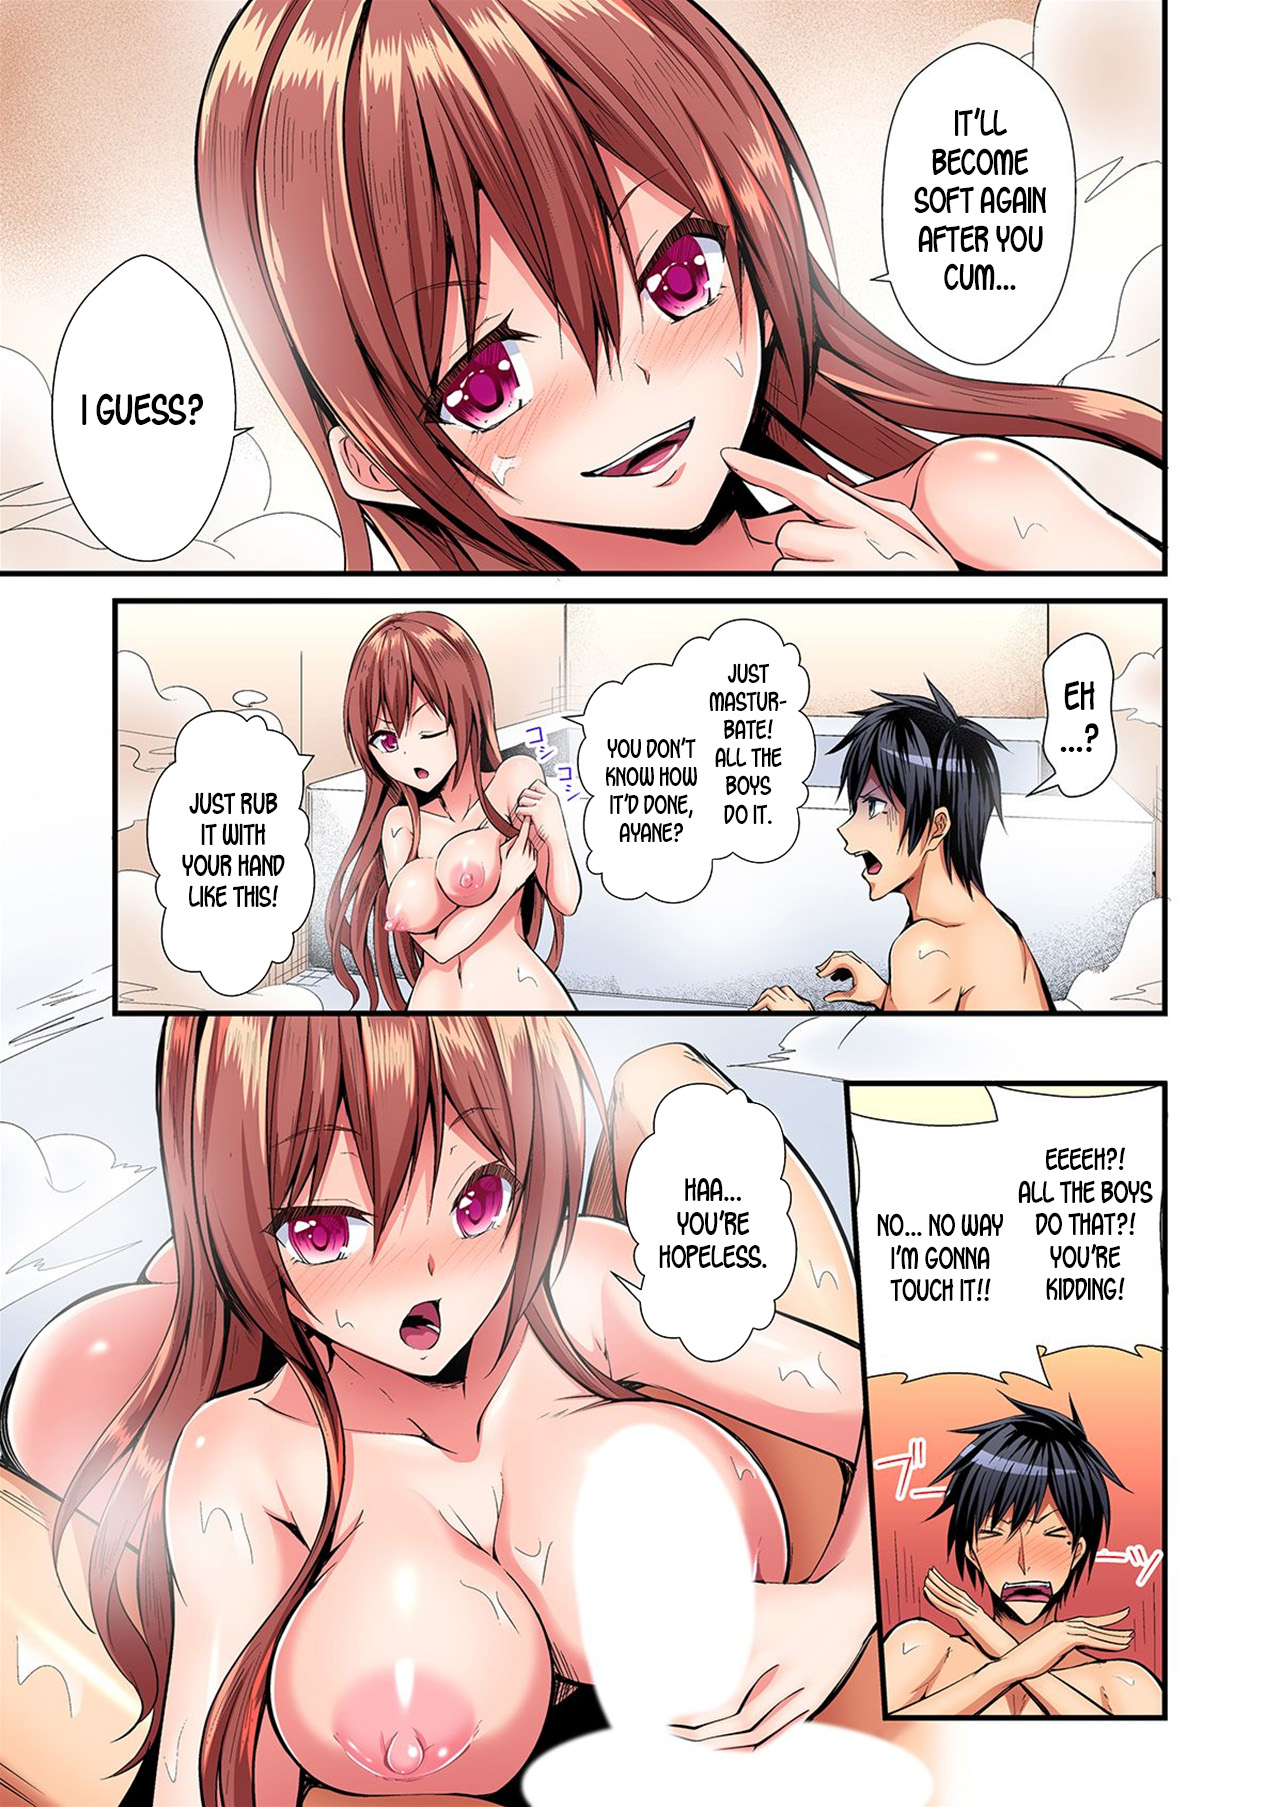 [Suishin Tenra] Switch bodies and have noisy sex! I can't stand Ayanee's sensitive body ch.1-2 [desudesu] page 20 full